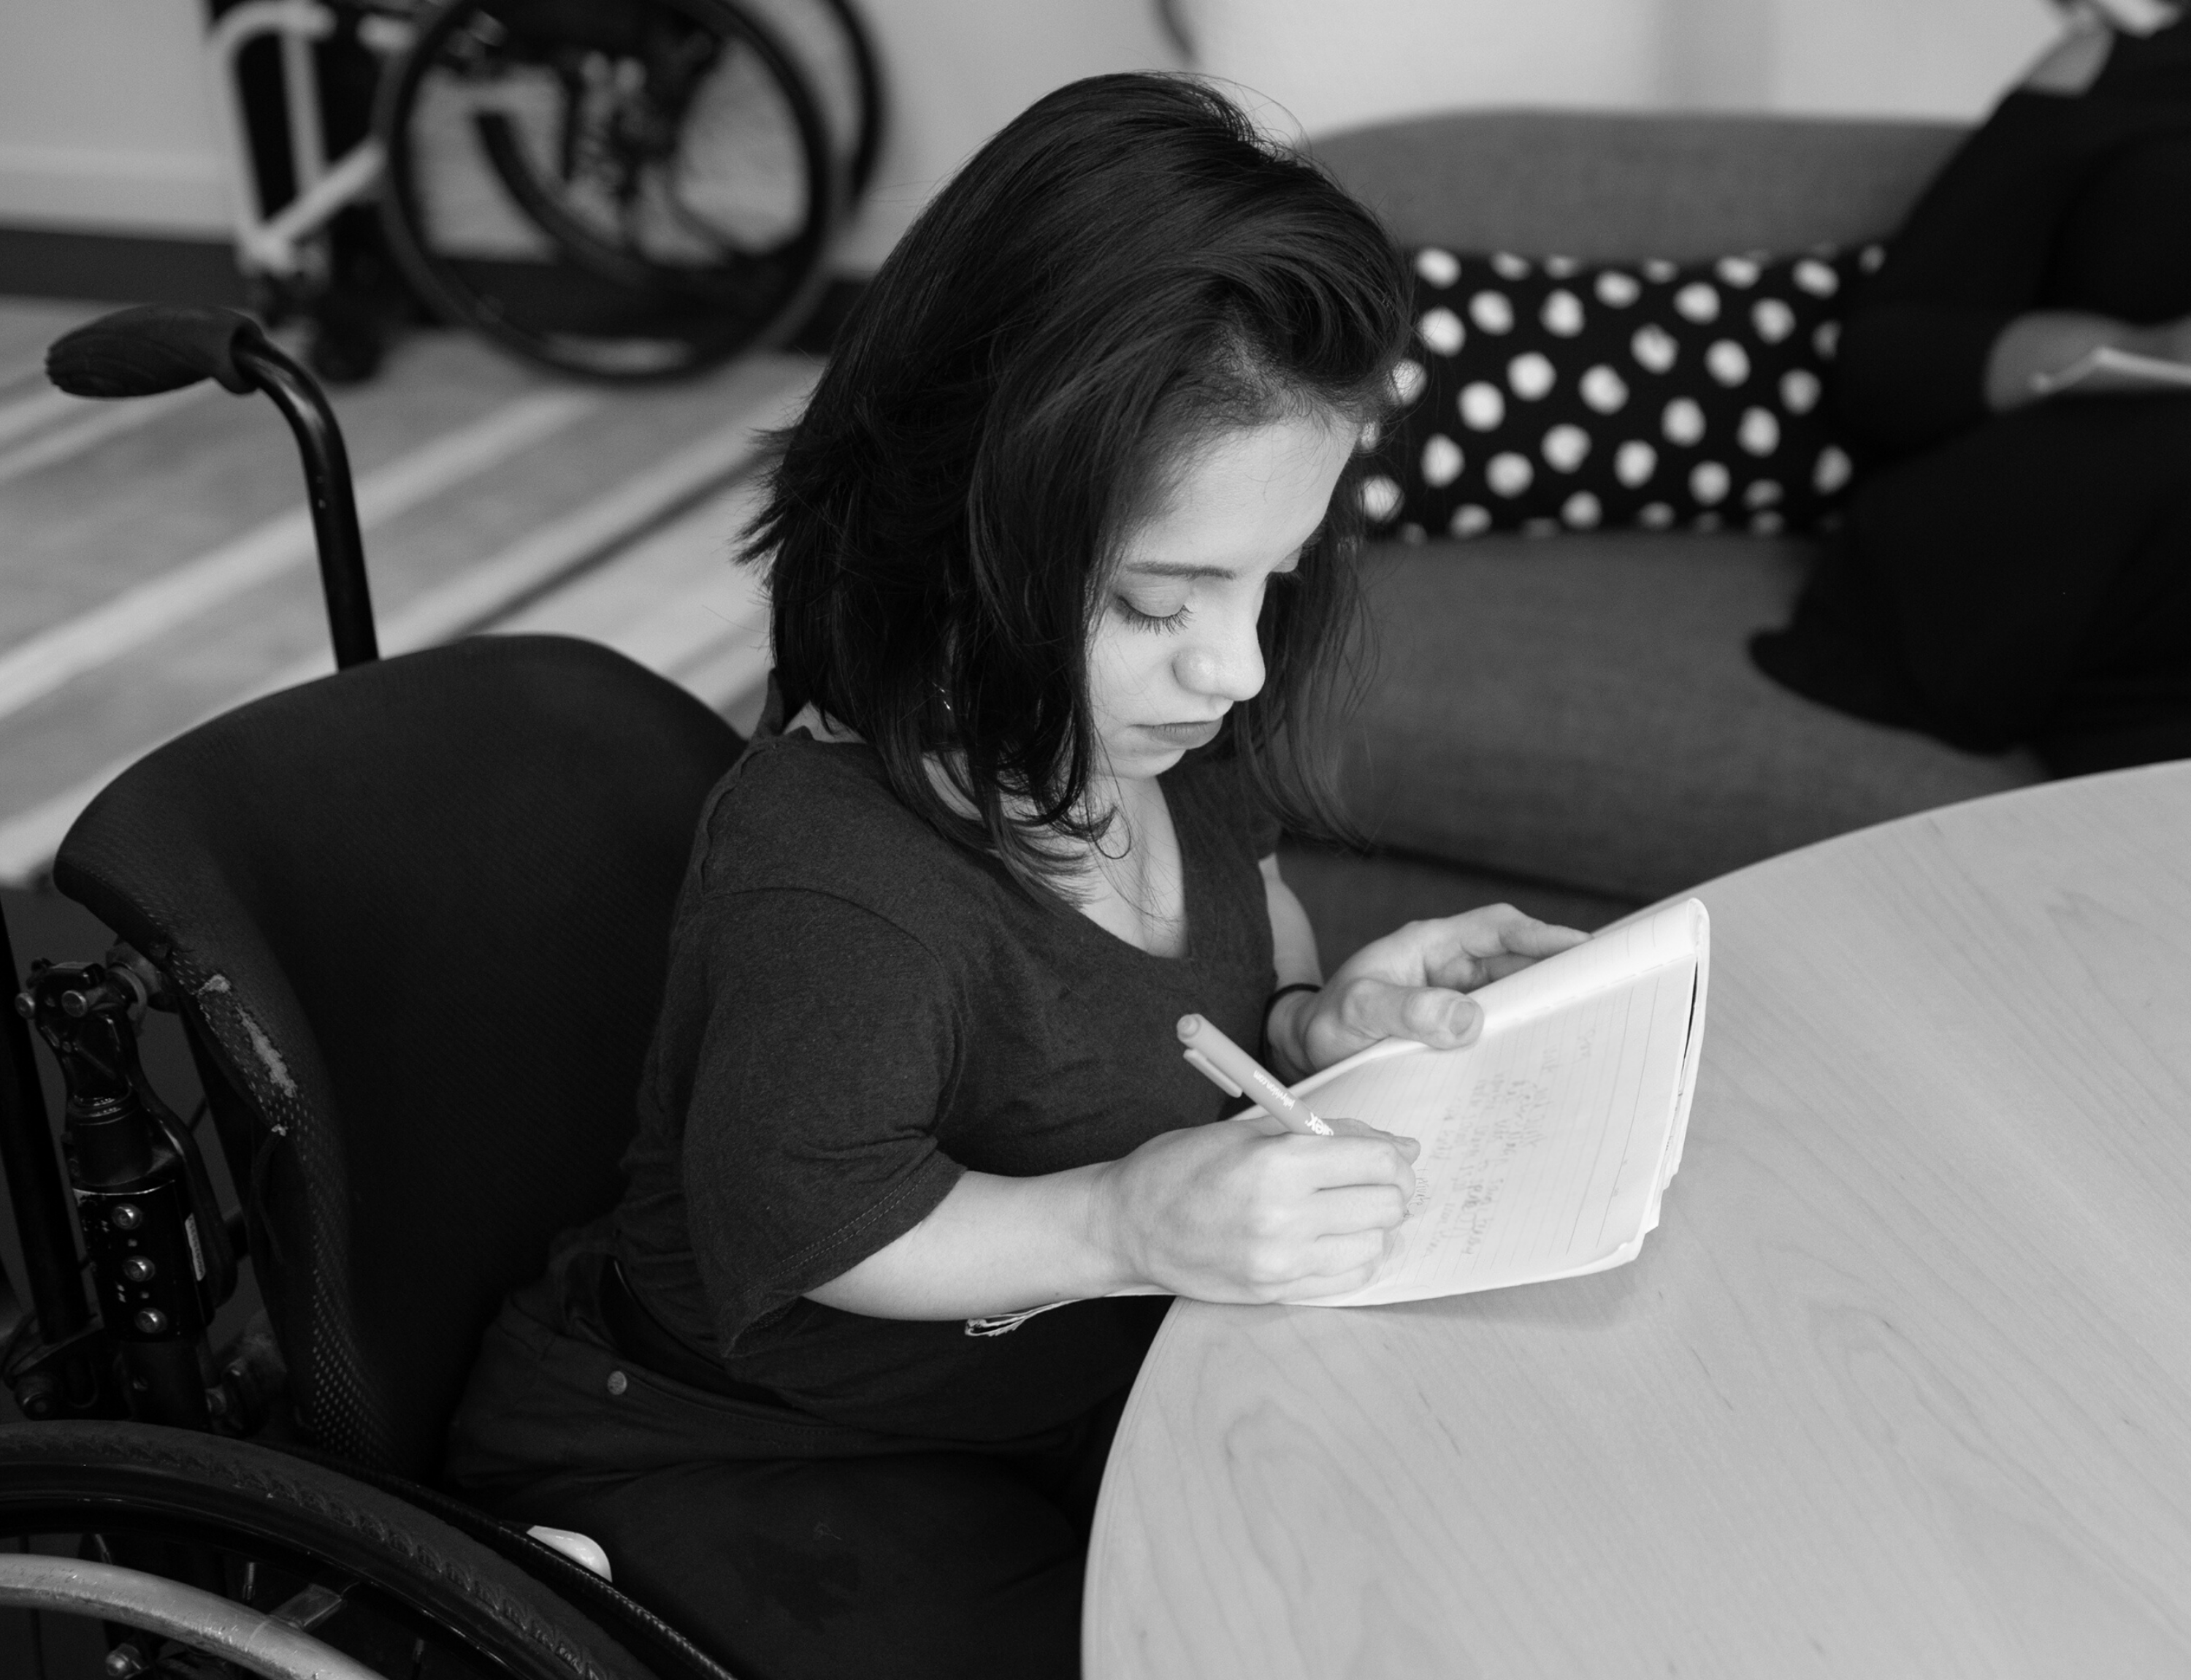 A South Asian woman in her wheelchair takes notes by hand during a meeting.